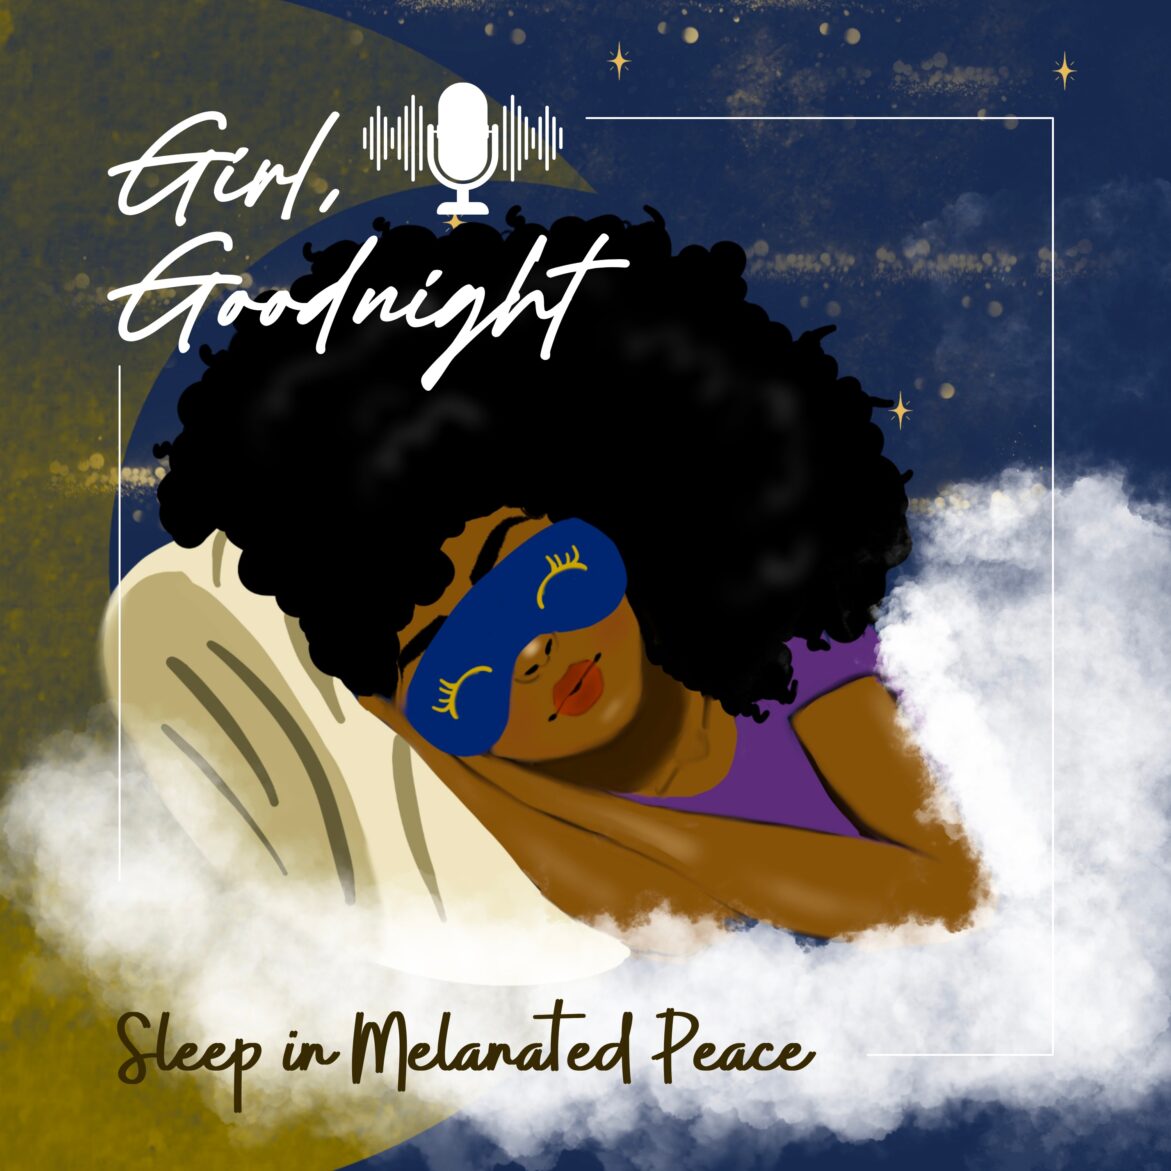 Black Podcasting - The Girl, Goodnight Cap-This is Healing pt 4